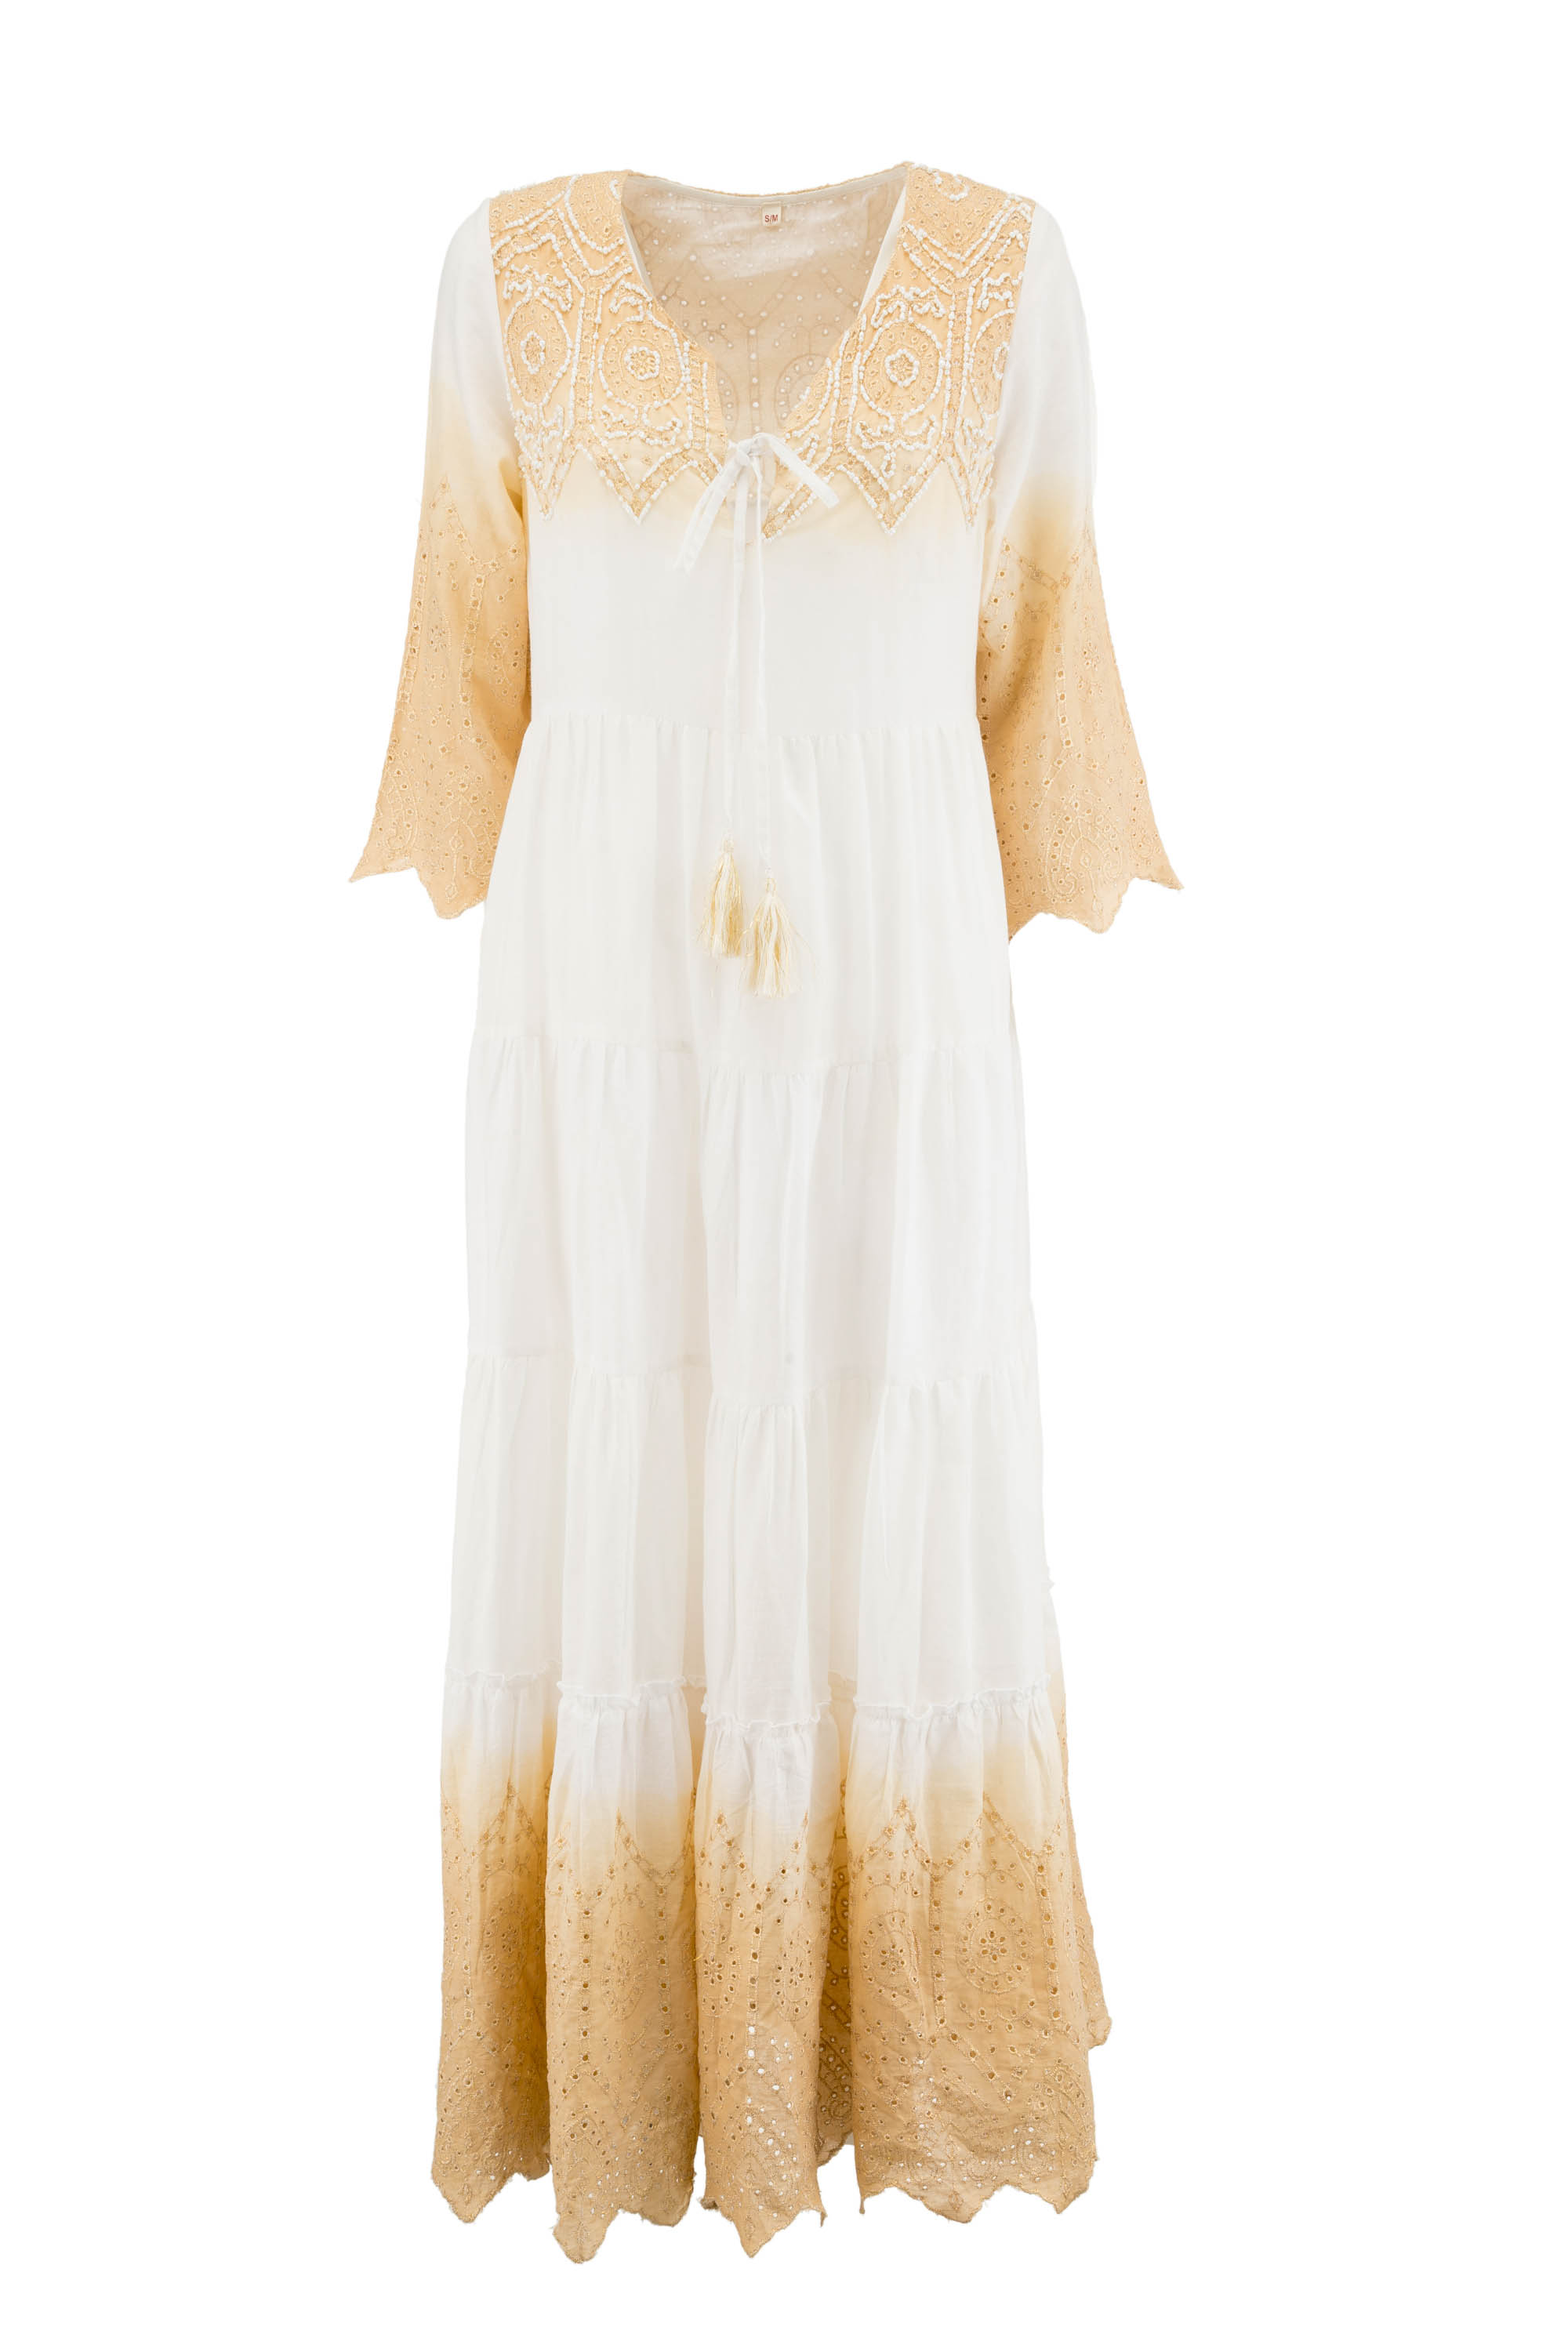 CAFTAN WHITE AND BEIGE - AMR-VE1613